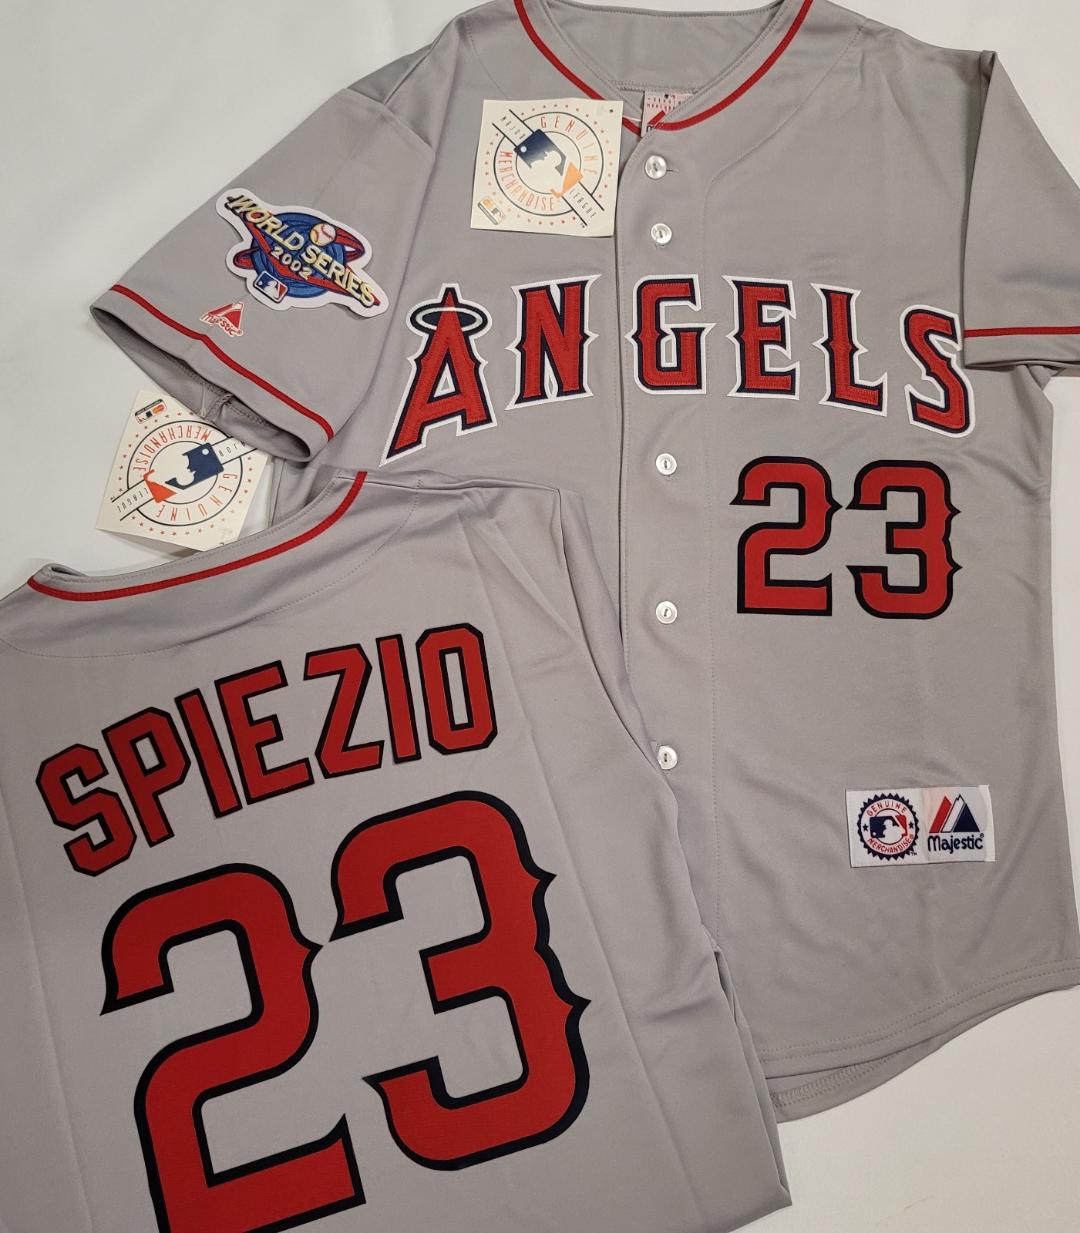 2002 angels jersey